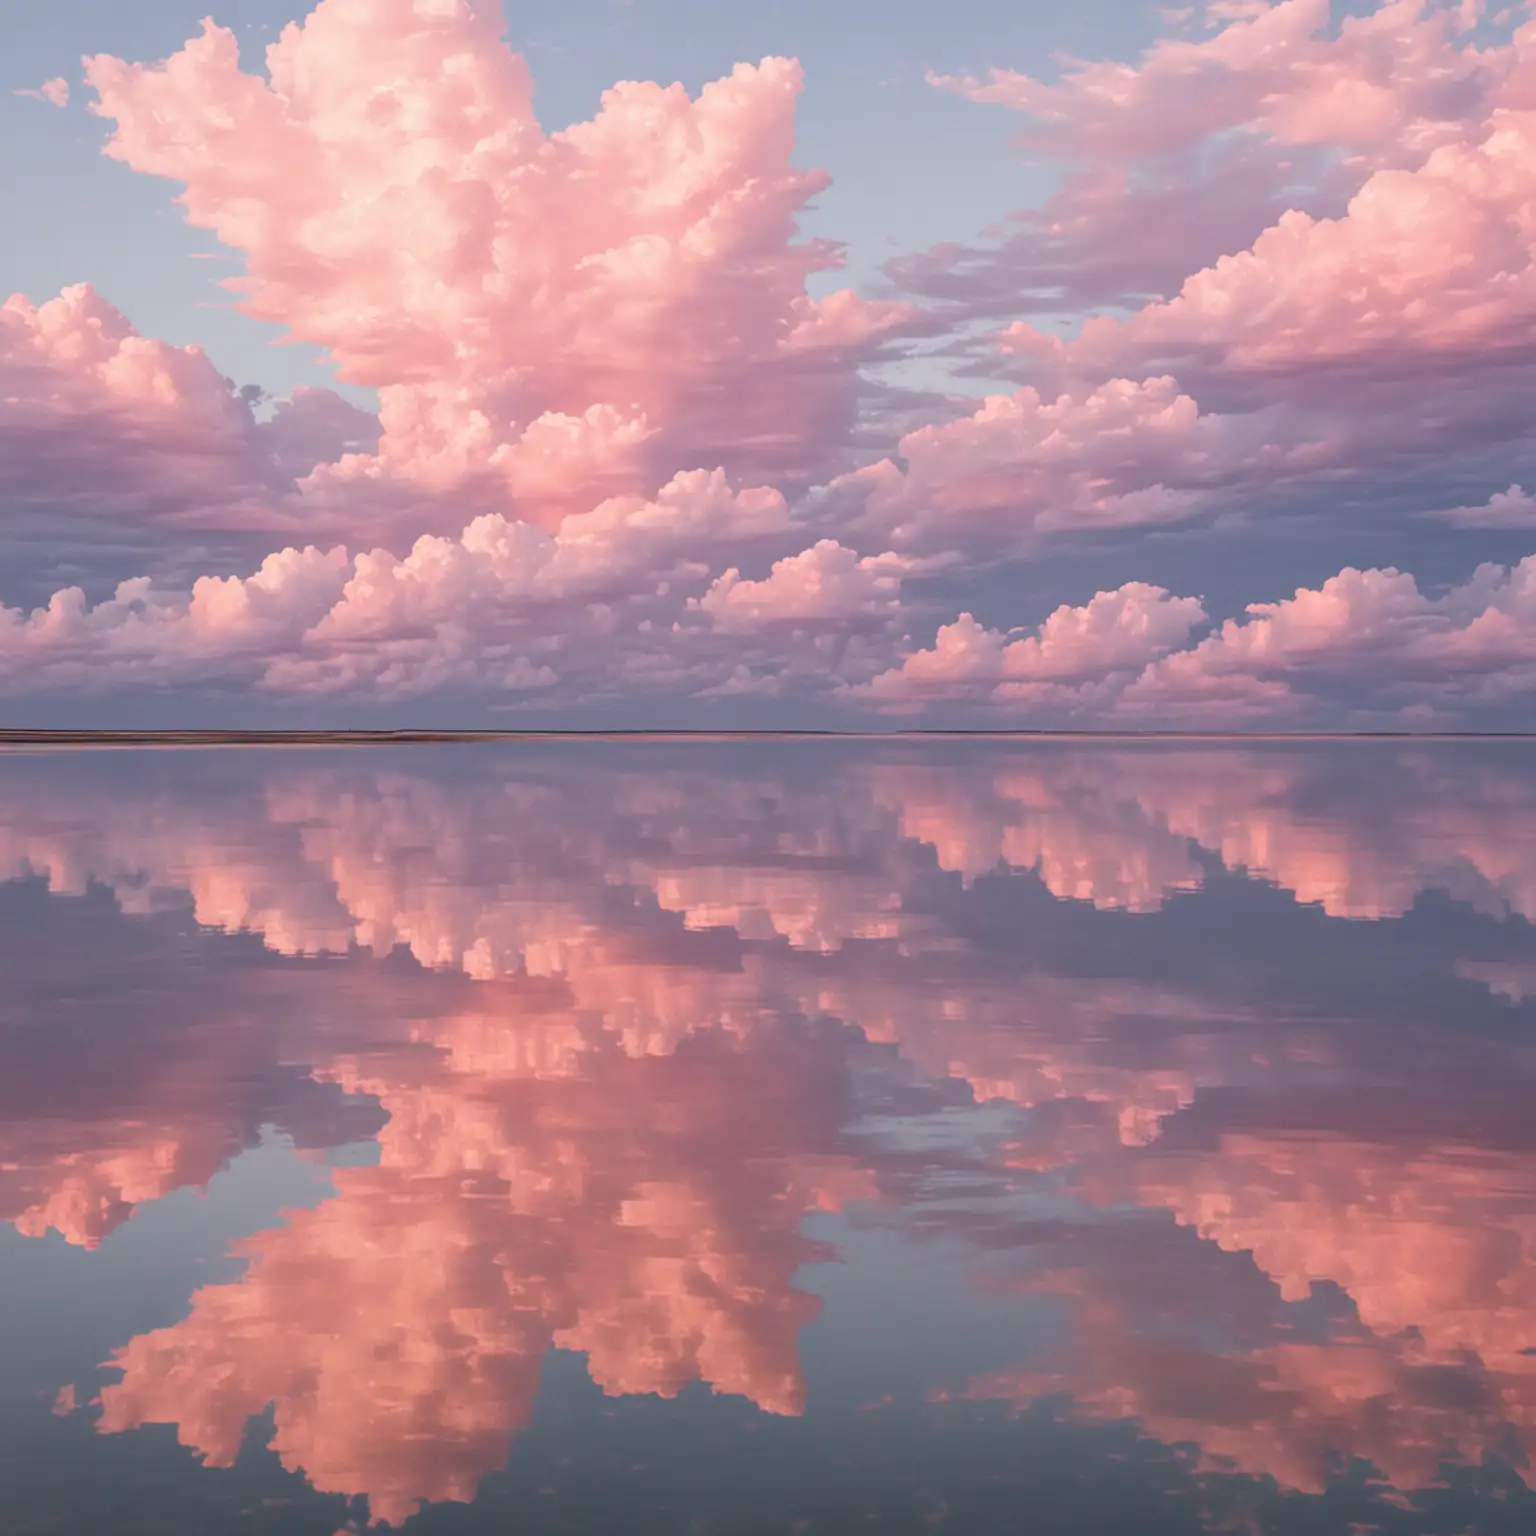 Tranquil Scene Pastel Clouds Reflecting in Water